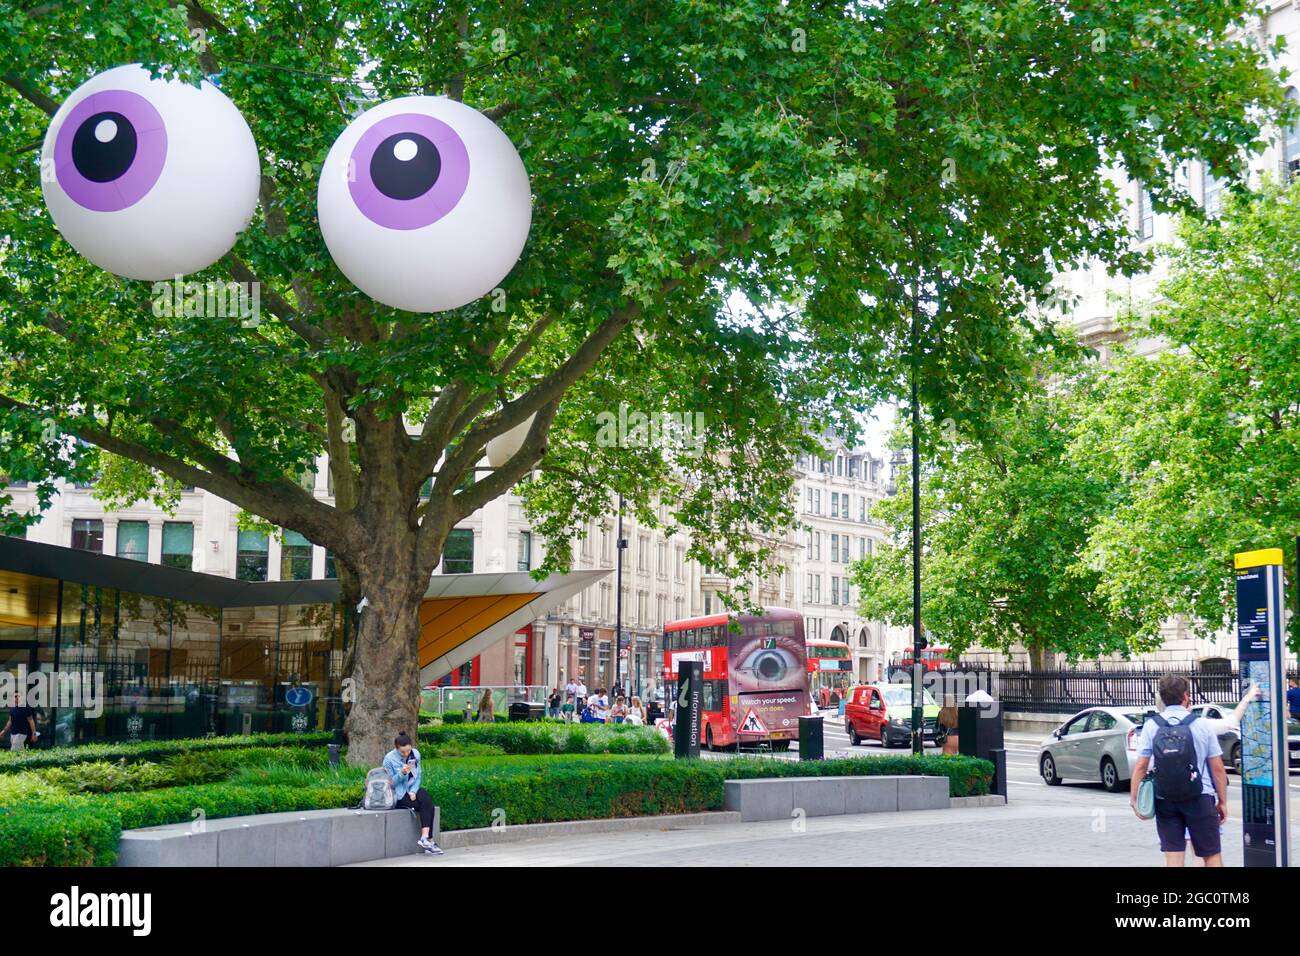 Giant inflatable googly eyes seen on a tree across central London. Part of  Mayor of London Sadiq Khan's #LetsDoLondon Family Fun season, the eyes  popped up in 'eye-conic' spots around the city 